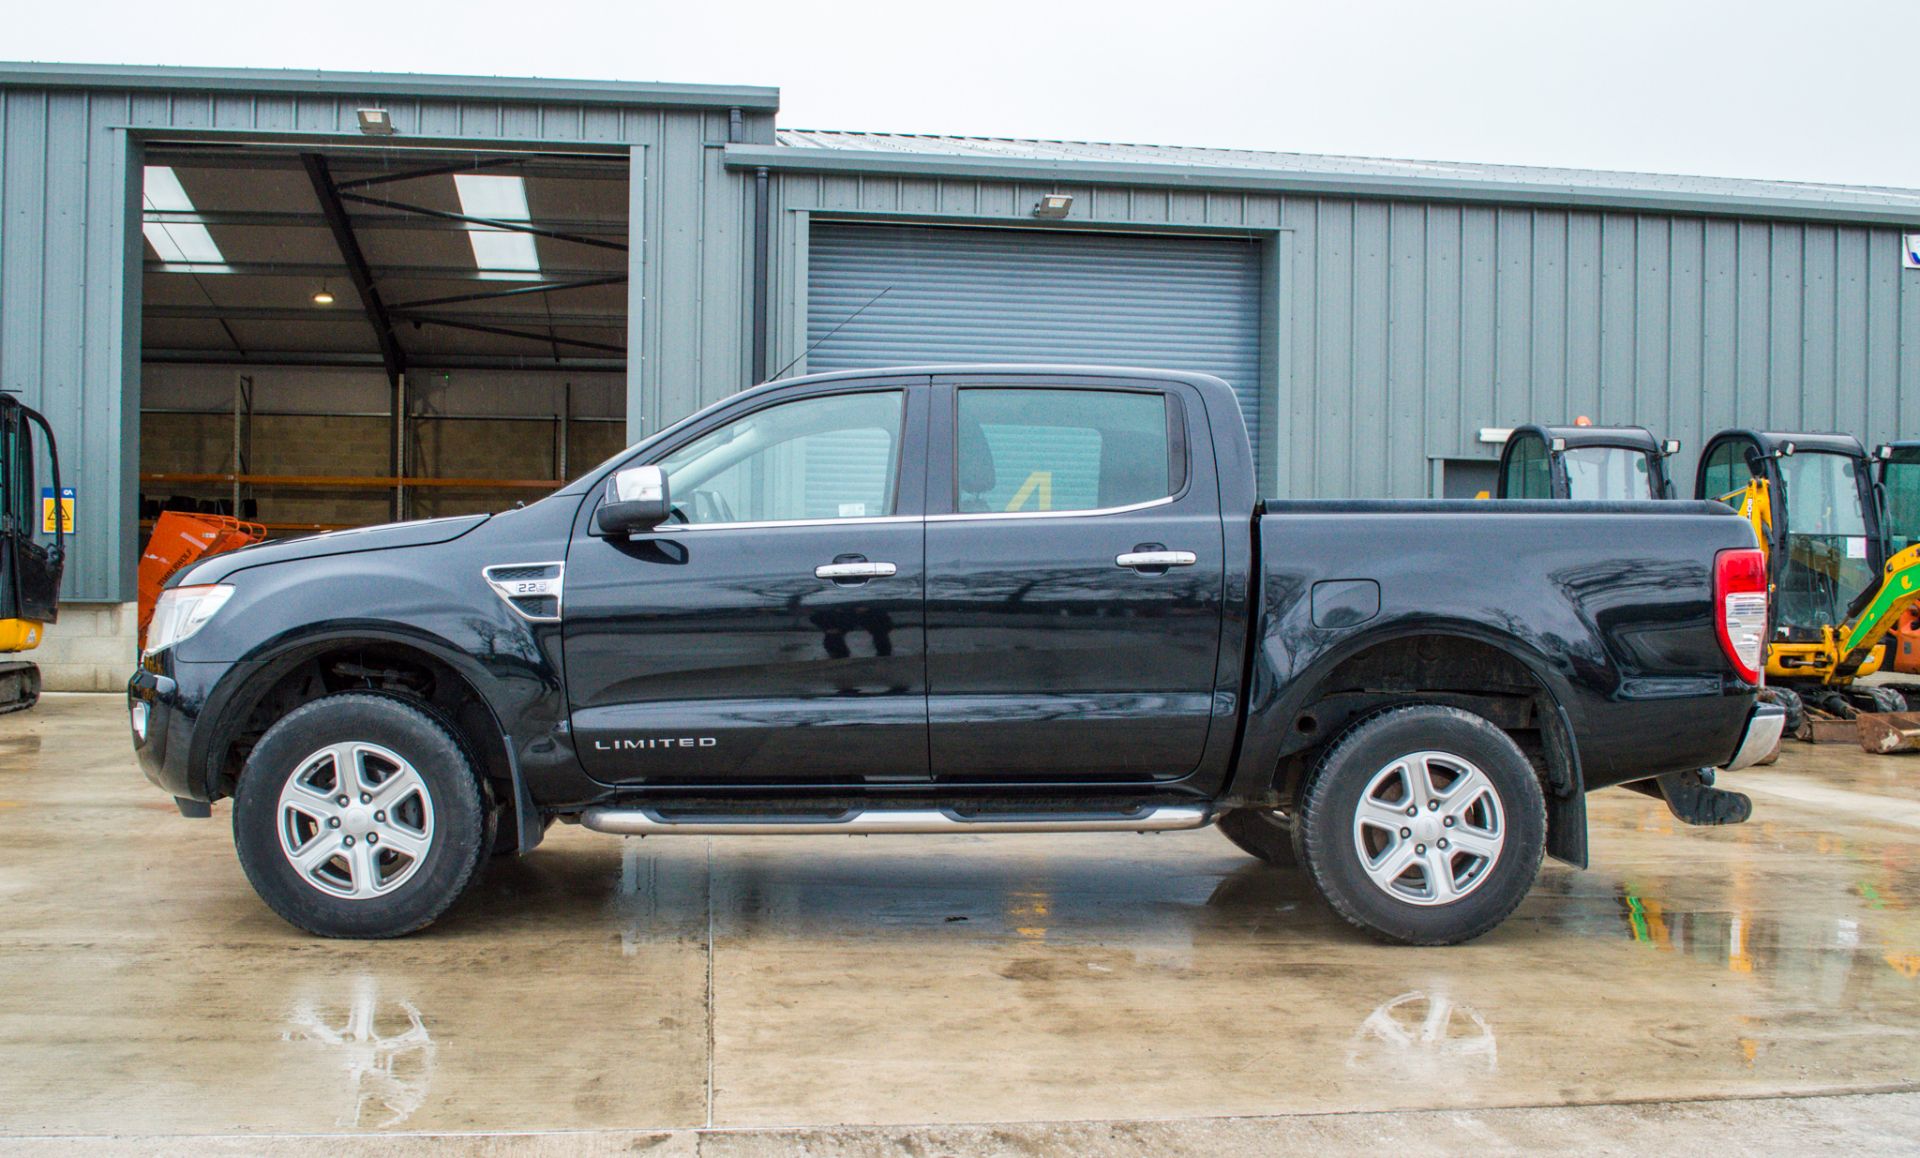 Ford Ranger 2.2 TDCI 150 Limited 4wd automatic double cab pick up - Image 13 of 28